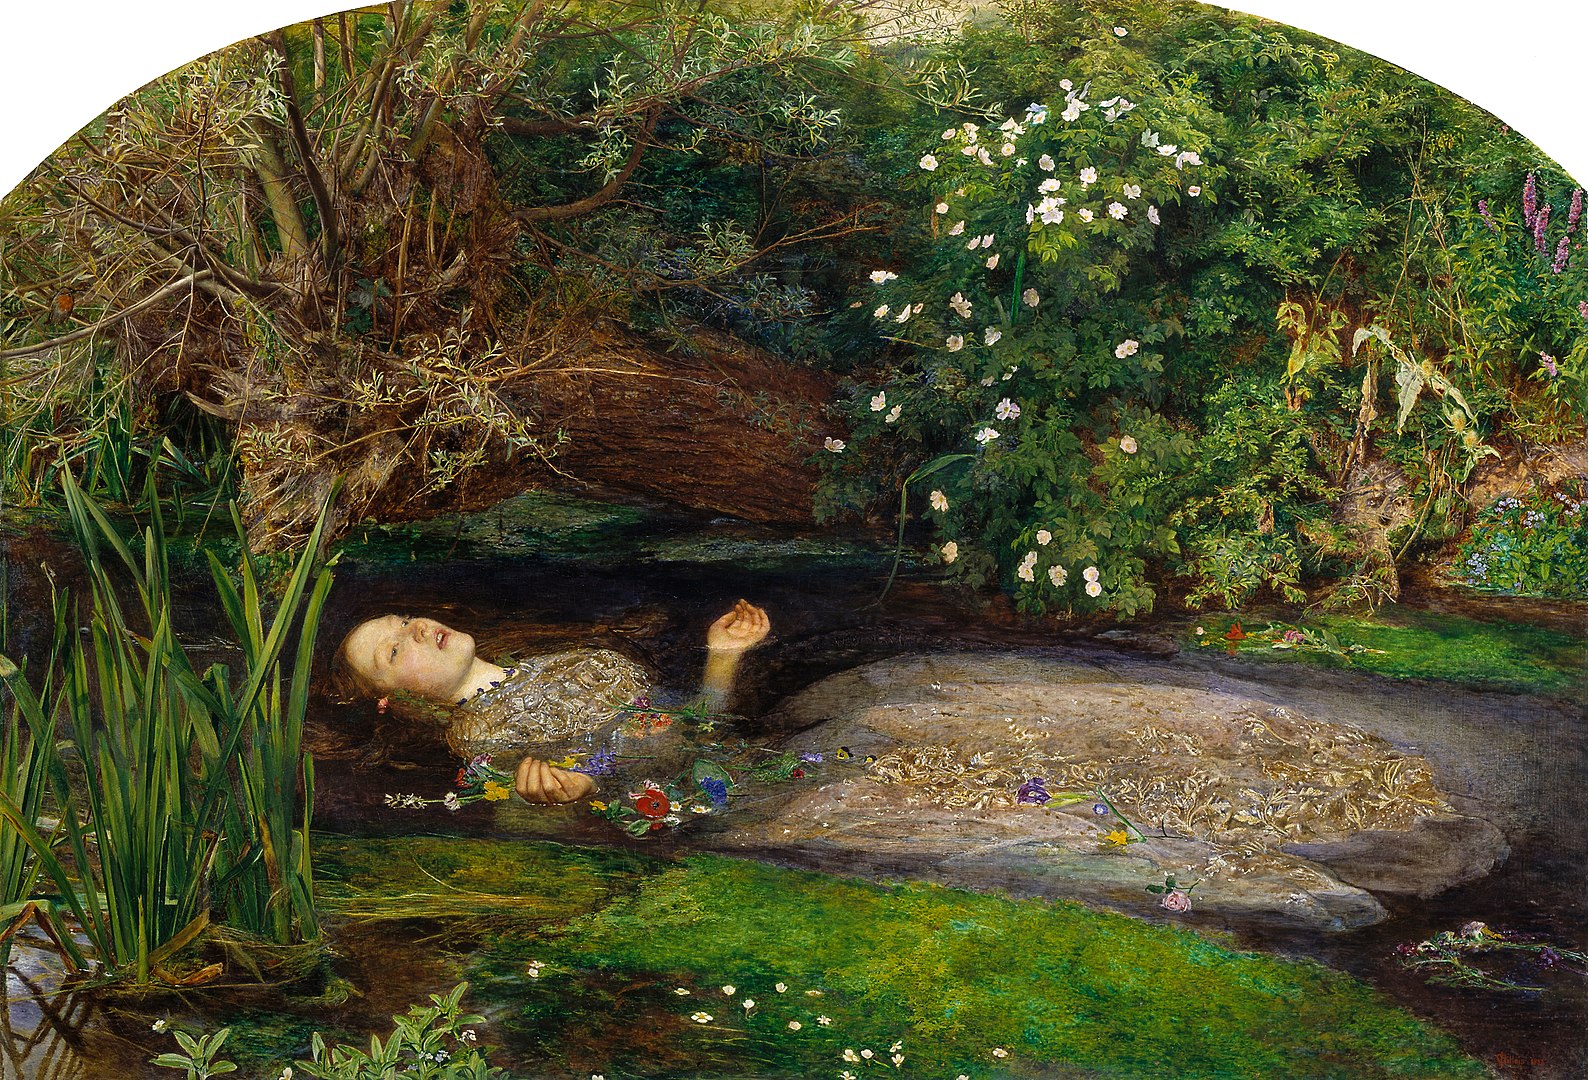 A young woman floats in a swampy body of water surrounded by flowers and greenery.